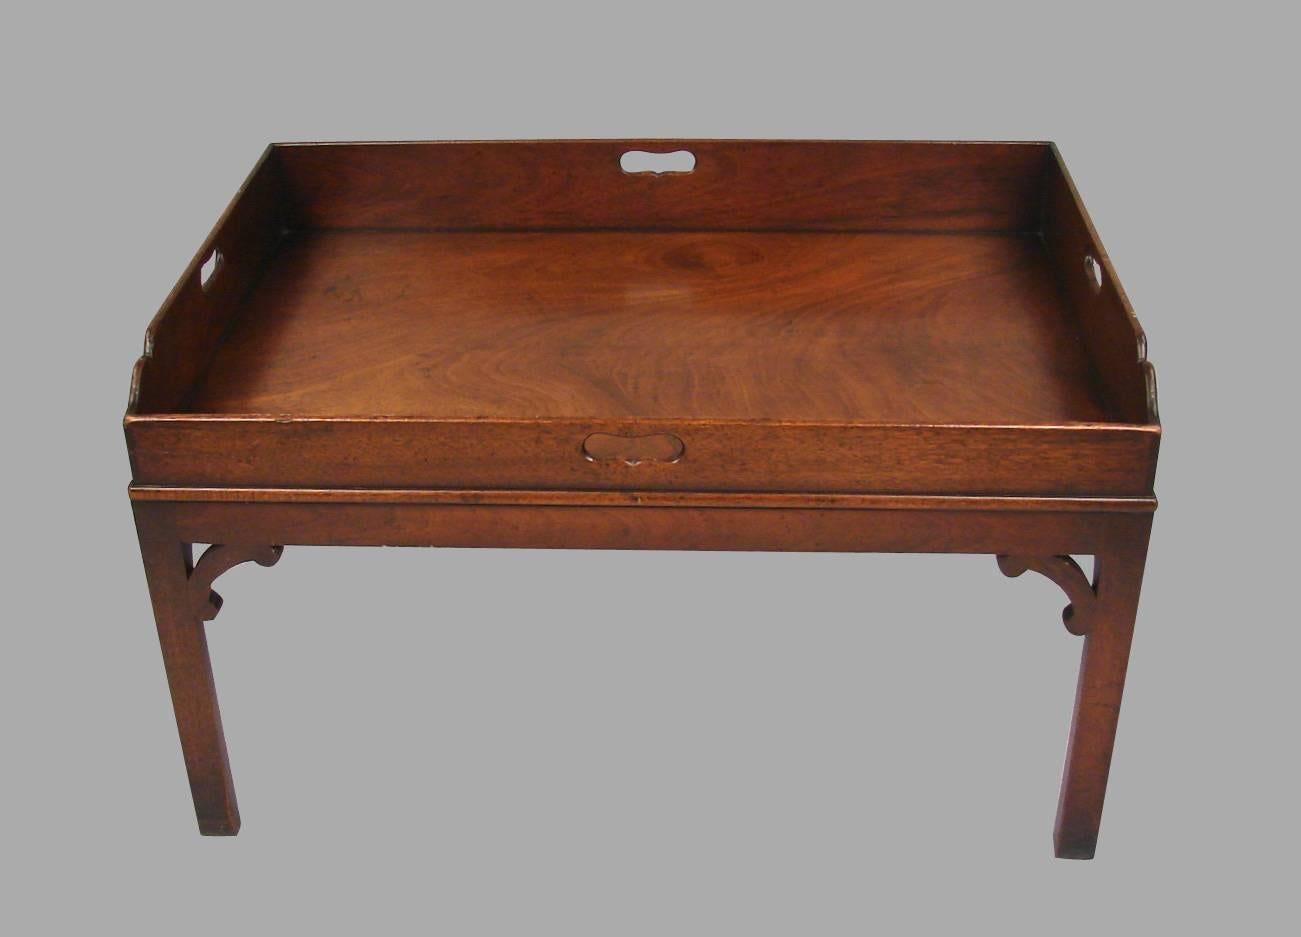 A Regency mahogany butler's tray, the well-figured top with four cut-out handles, the front edge lower than the sides, now mounted on a custom mahogany stand with Chippendale-style corner brackets tray, circa 1820.